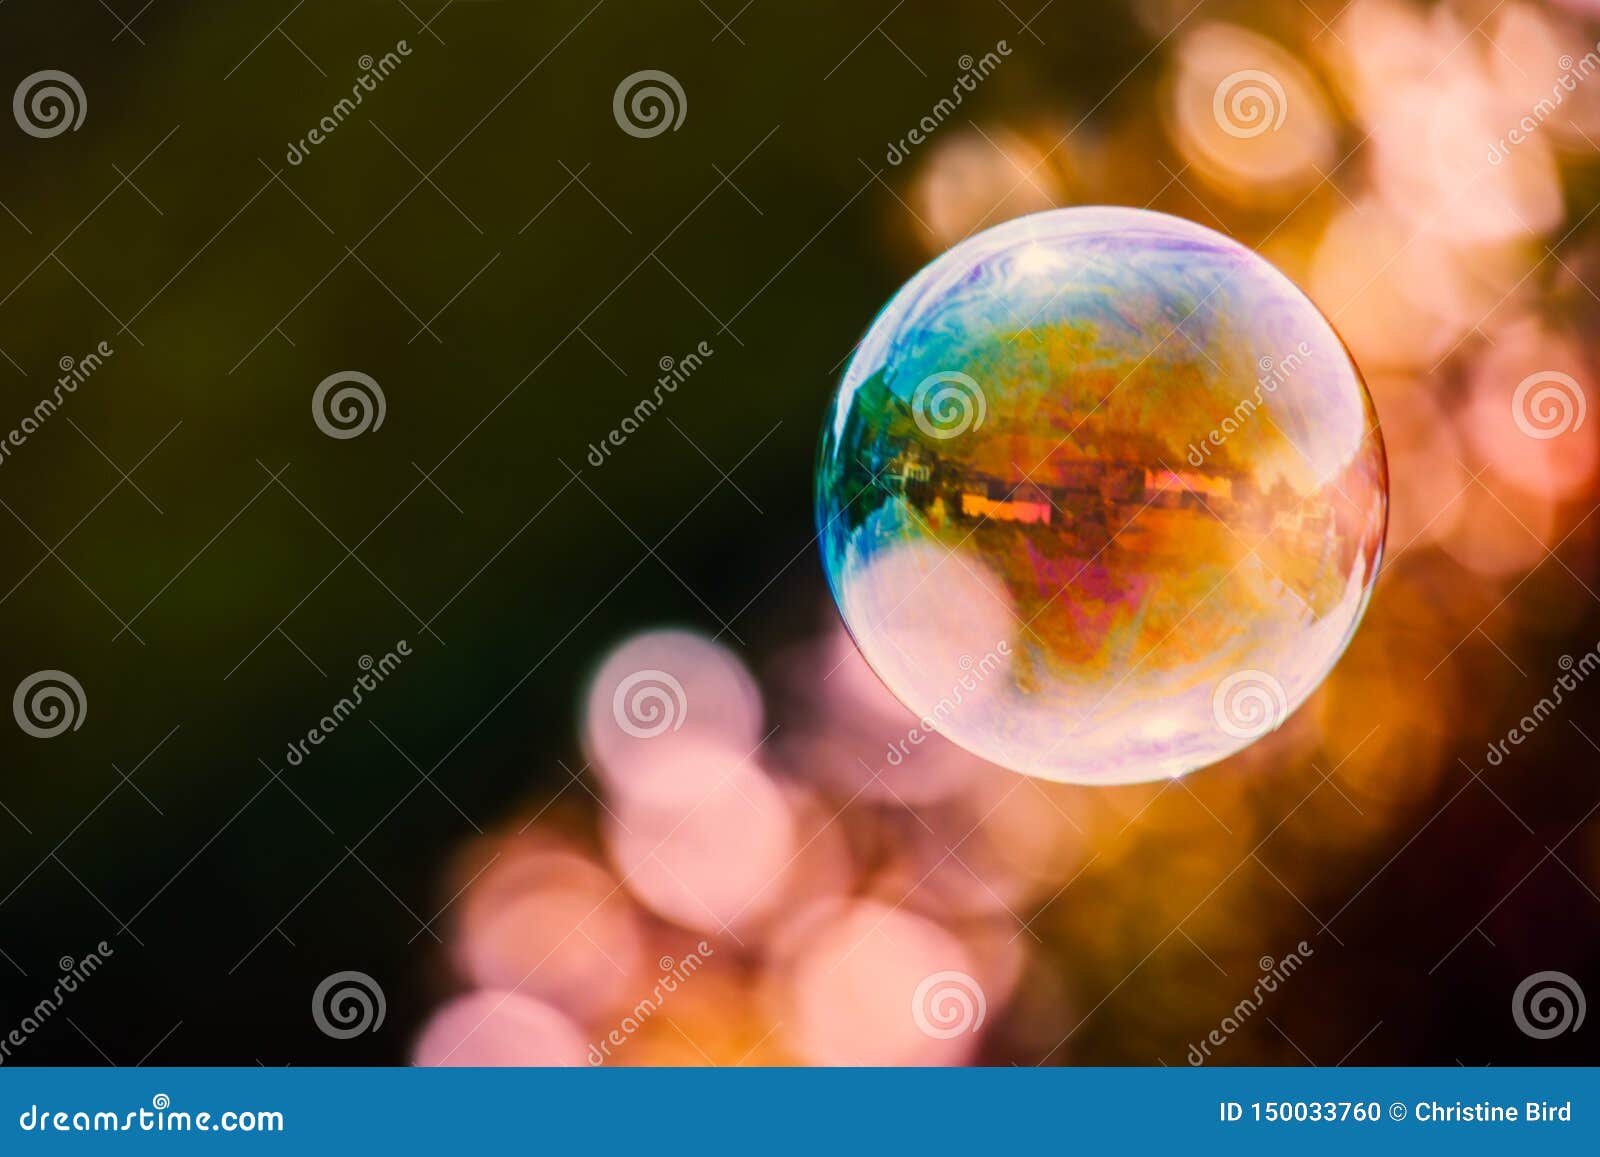 colourful soap bubble floating against a mainly dark background with a streak of light bubble bokeh.